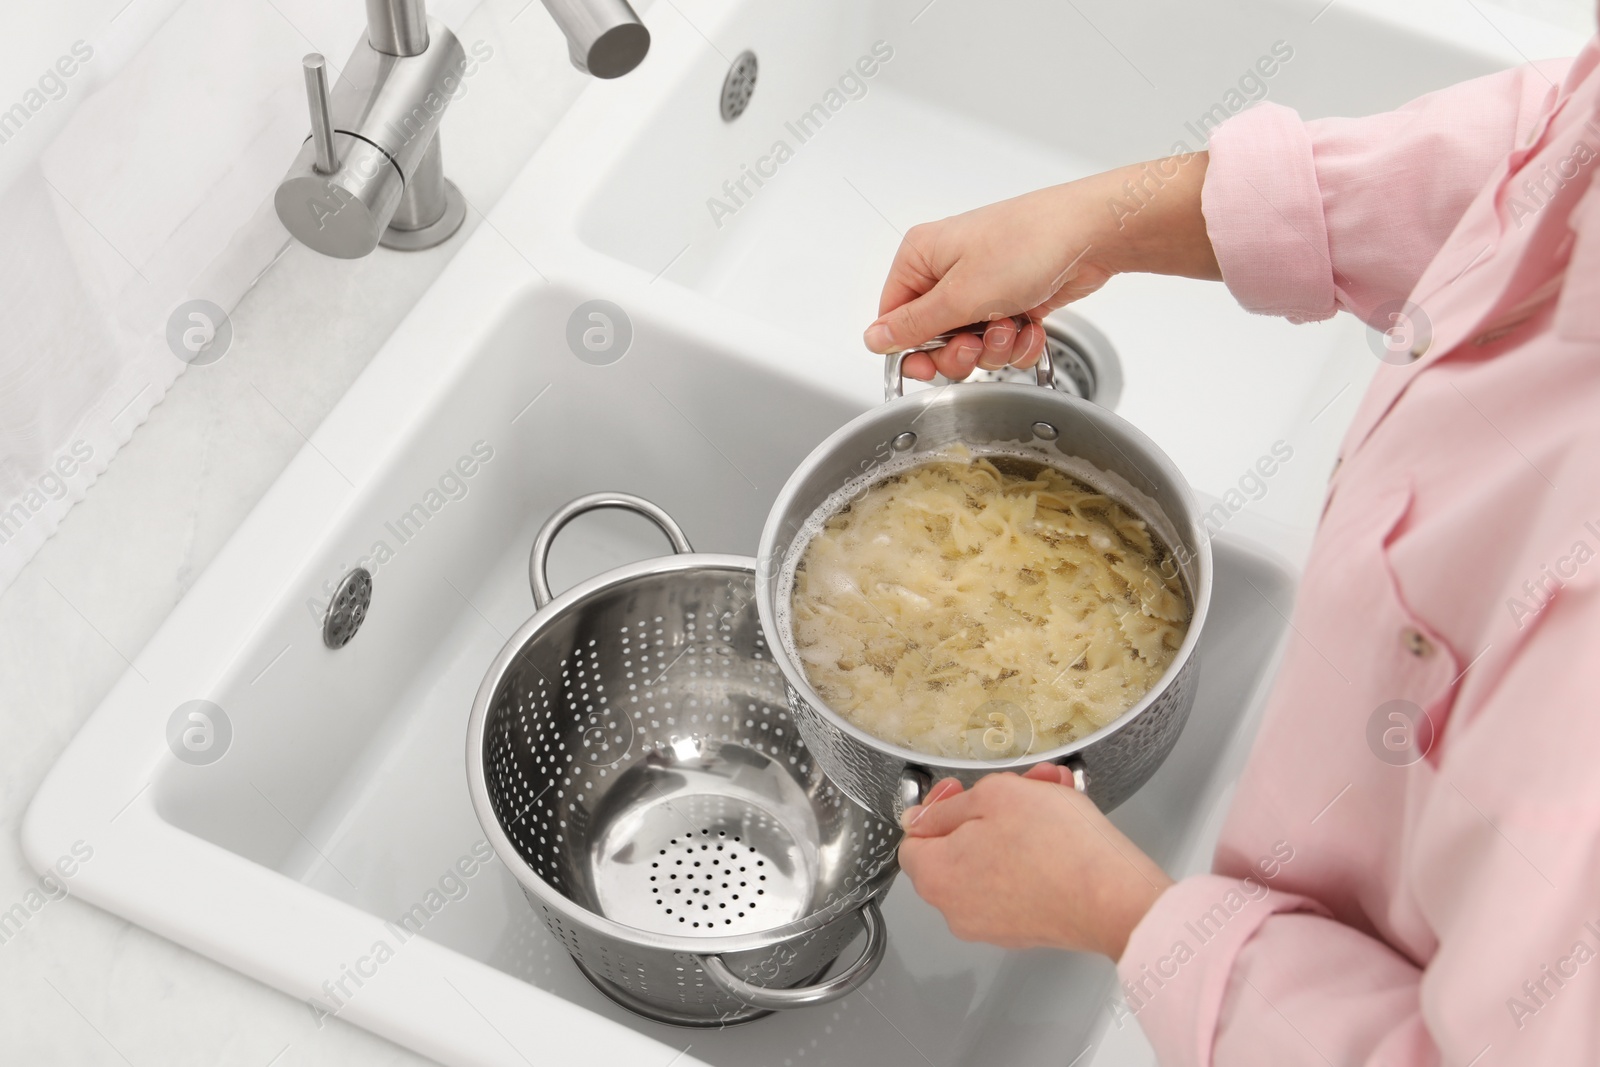 Photo of Woman draining pasta into colander at sink, above view